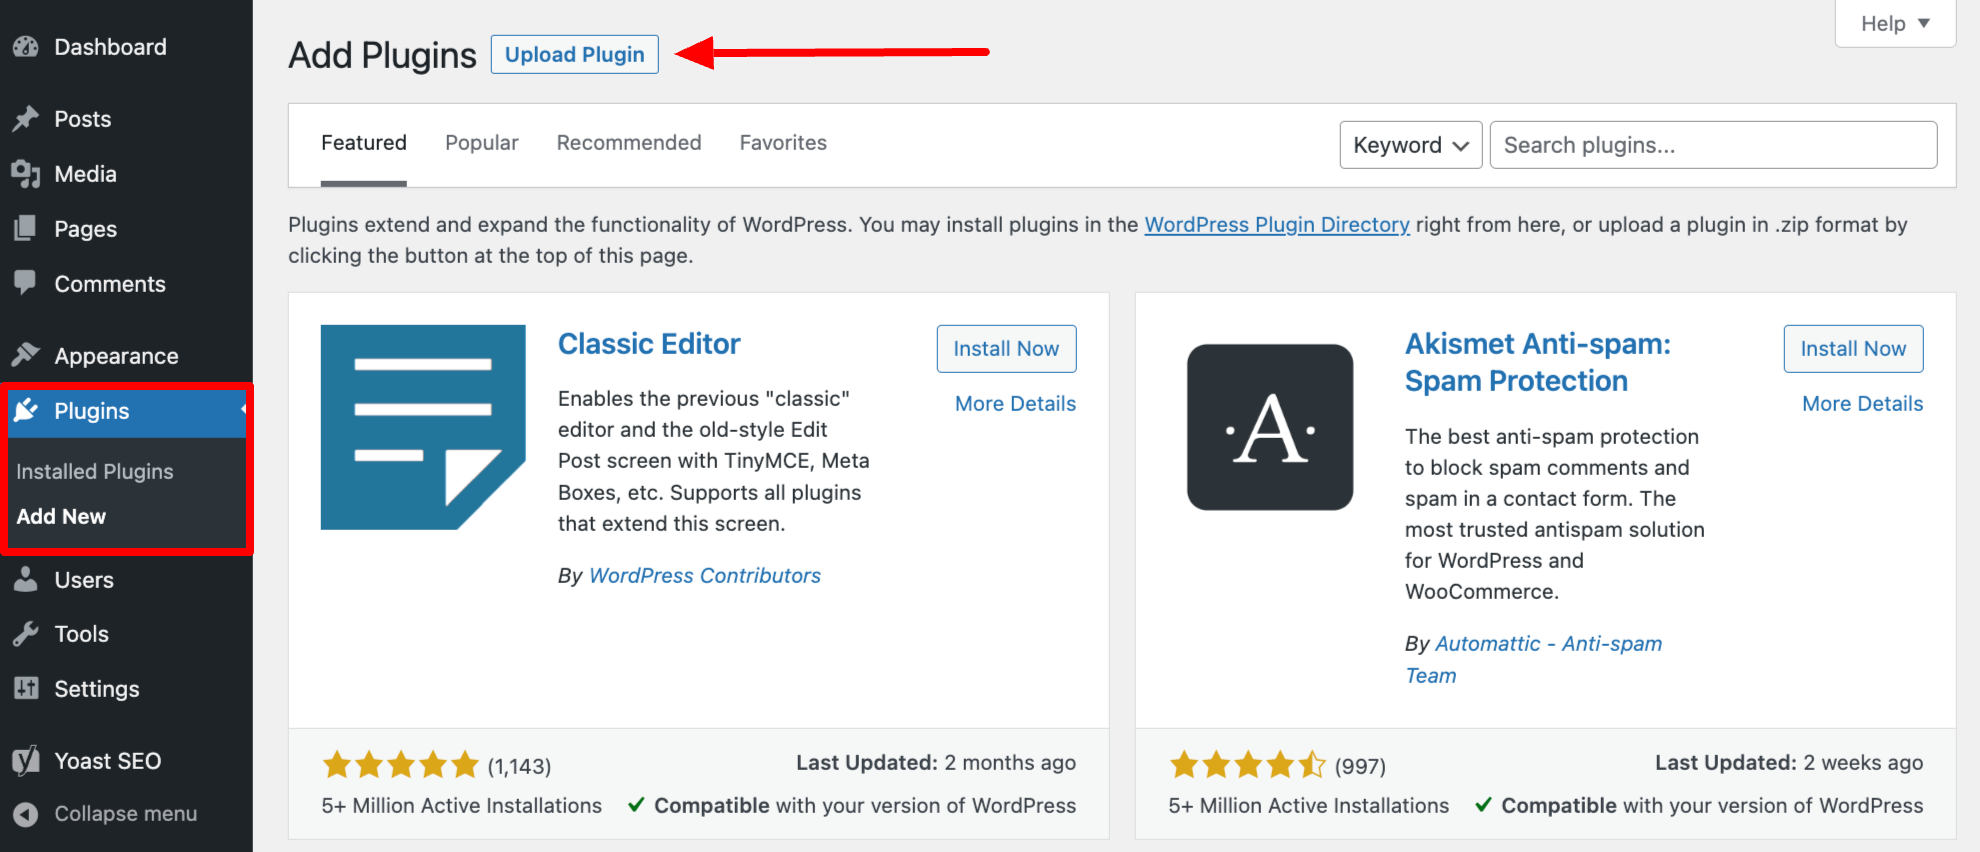 You can install plugins by uploading them to the WordPress admin interface.